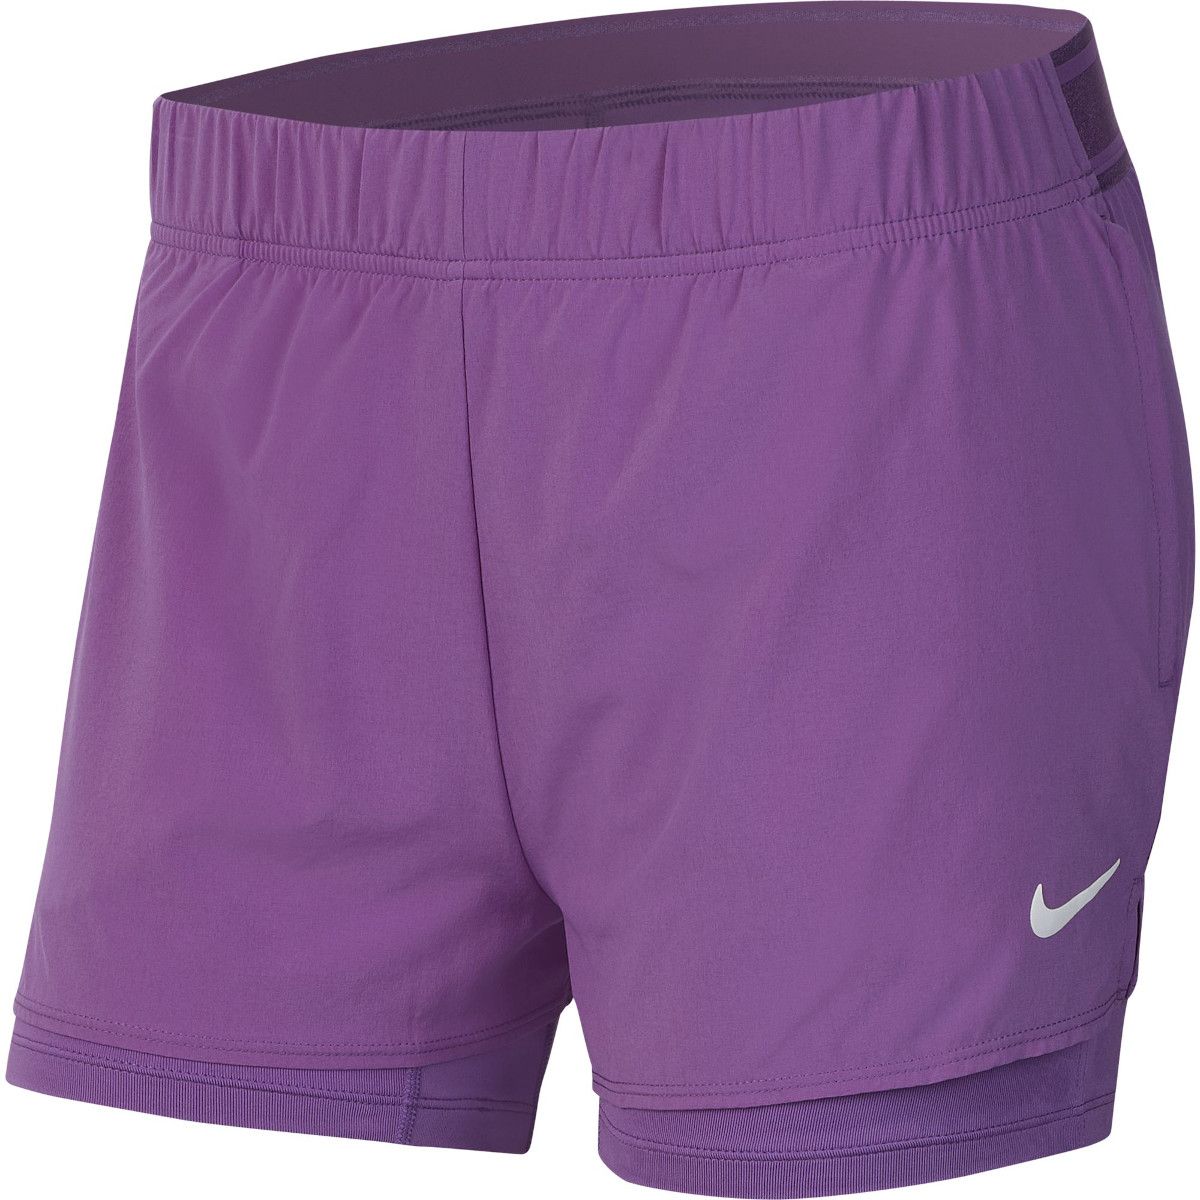 Nike Court Flex Pure Shorts Top Sellers, SAVE 45% - mpgc.net